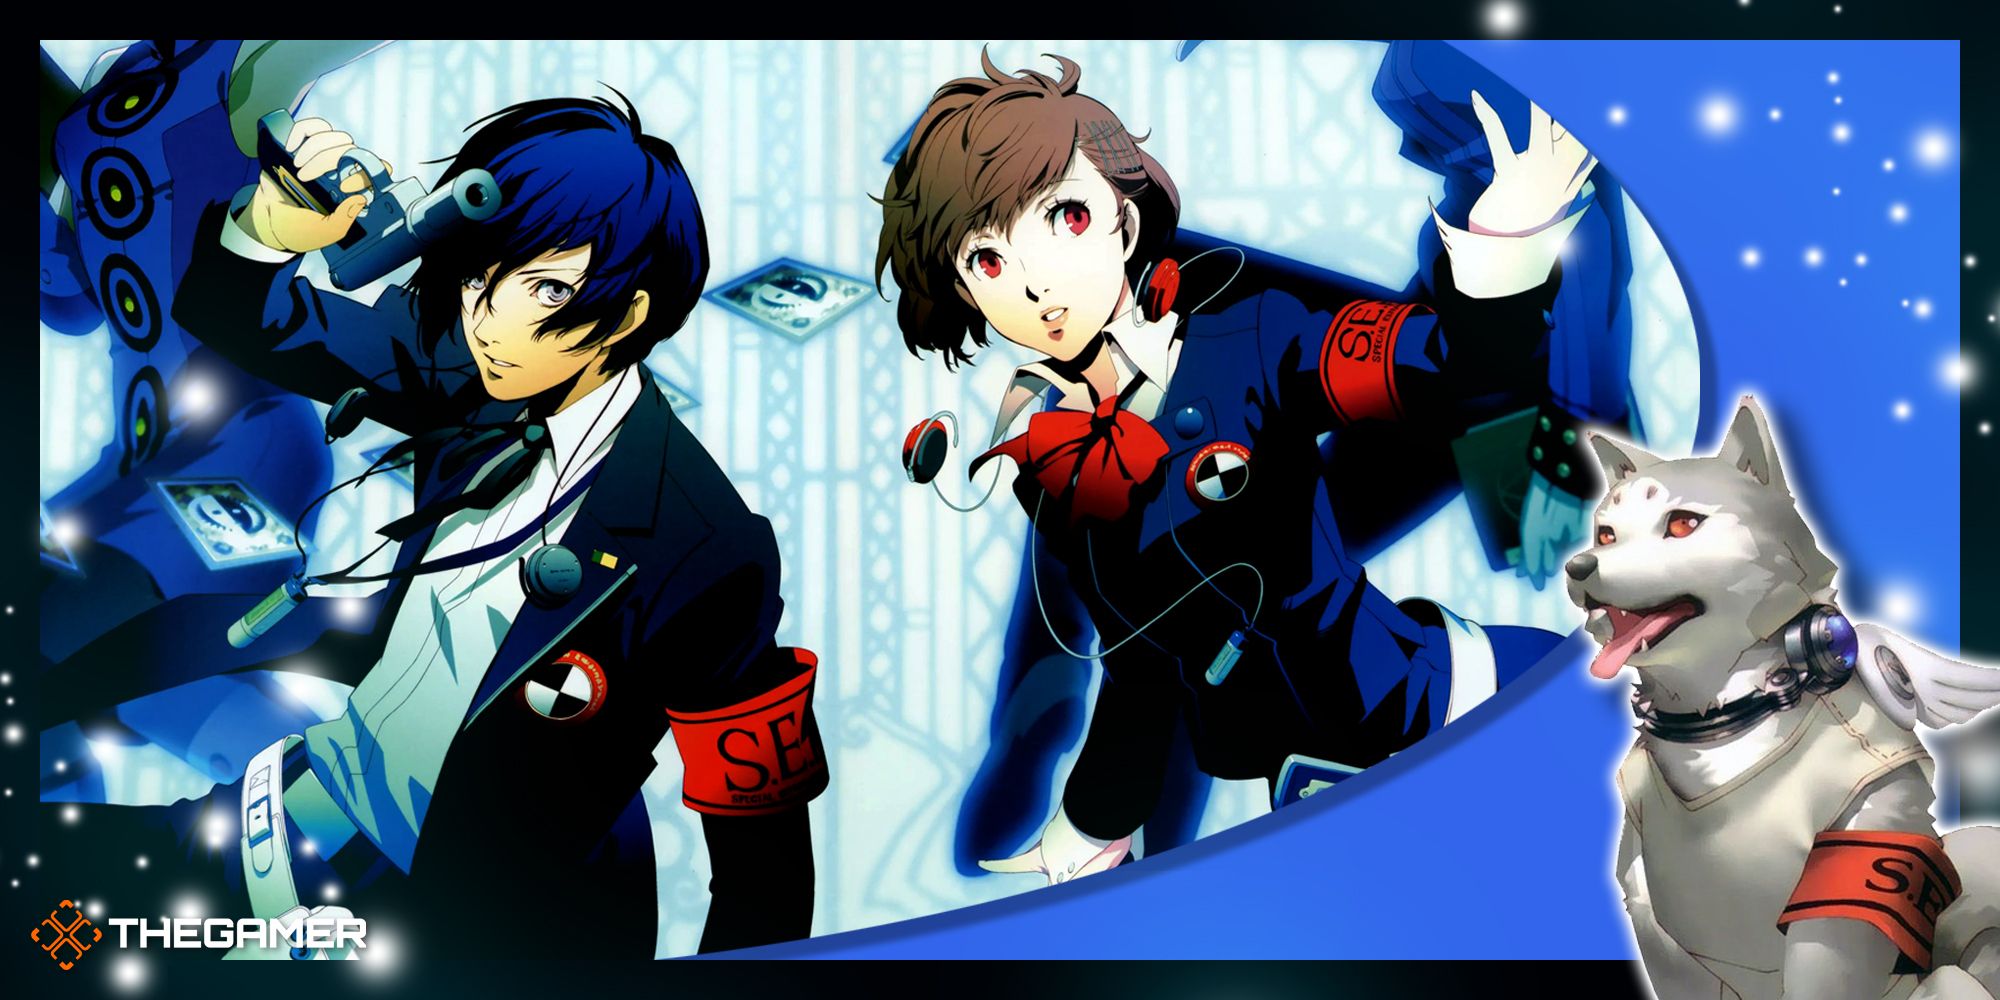 does persona 3 portable have the answer